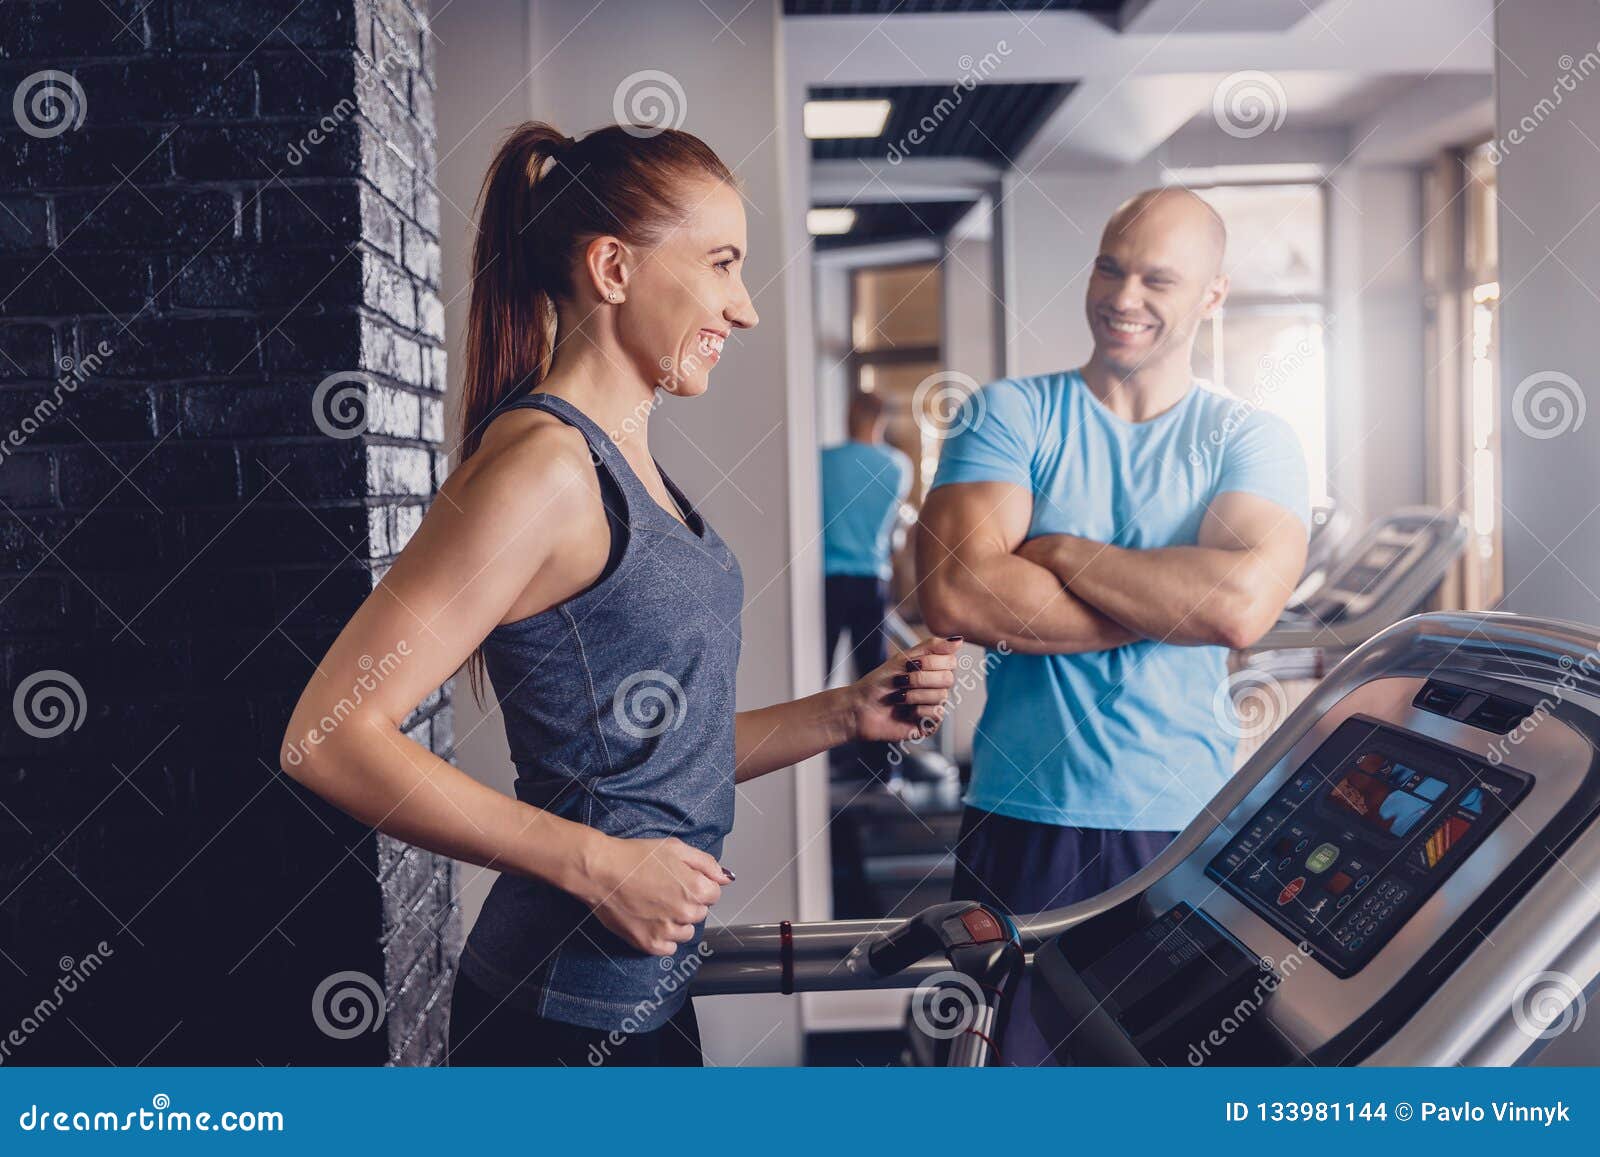 Personal Training With A Trainer On A Treadmill Stock Photo Image Of